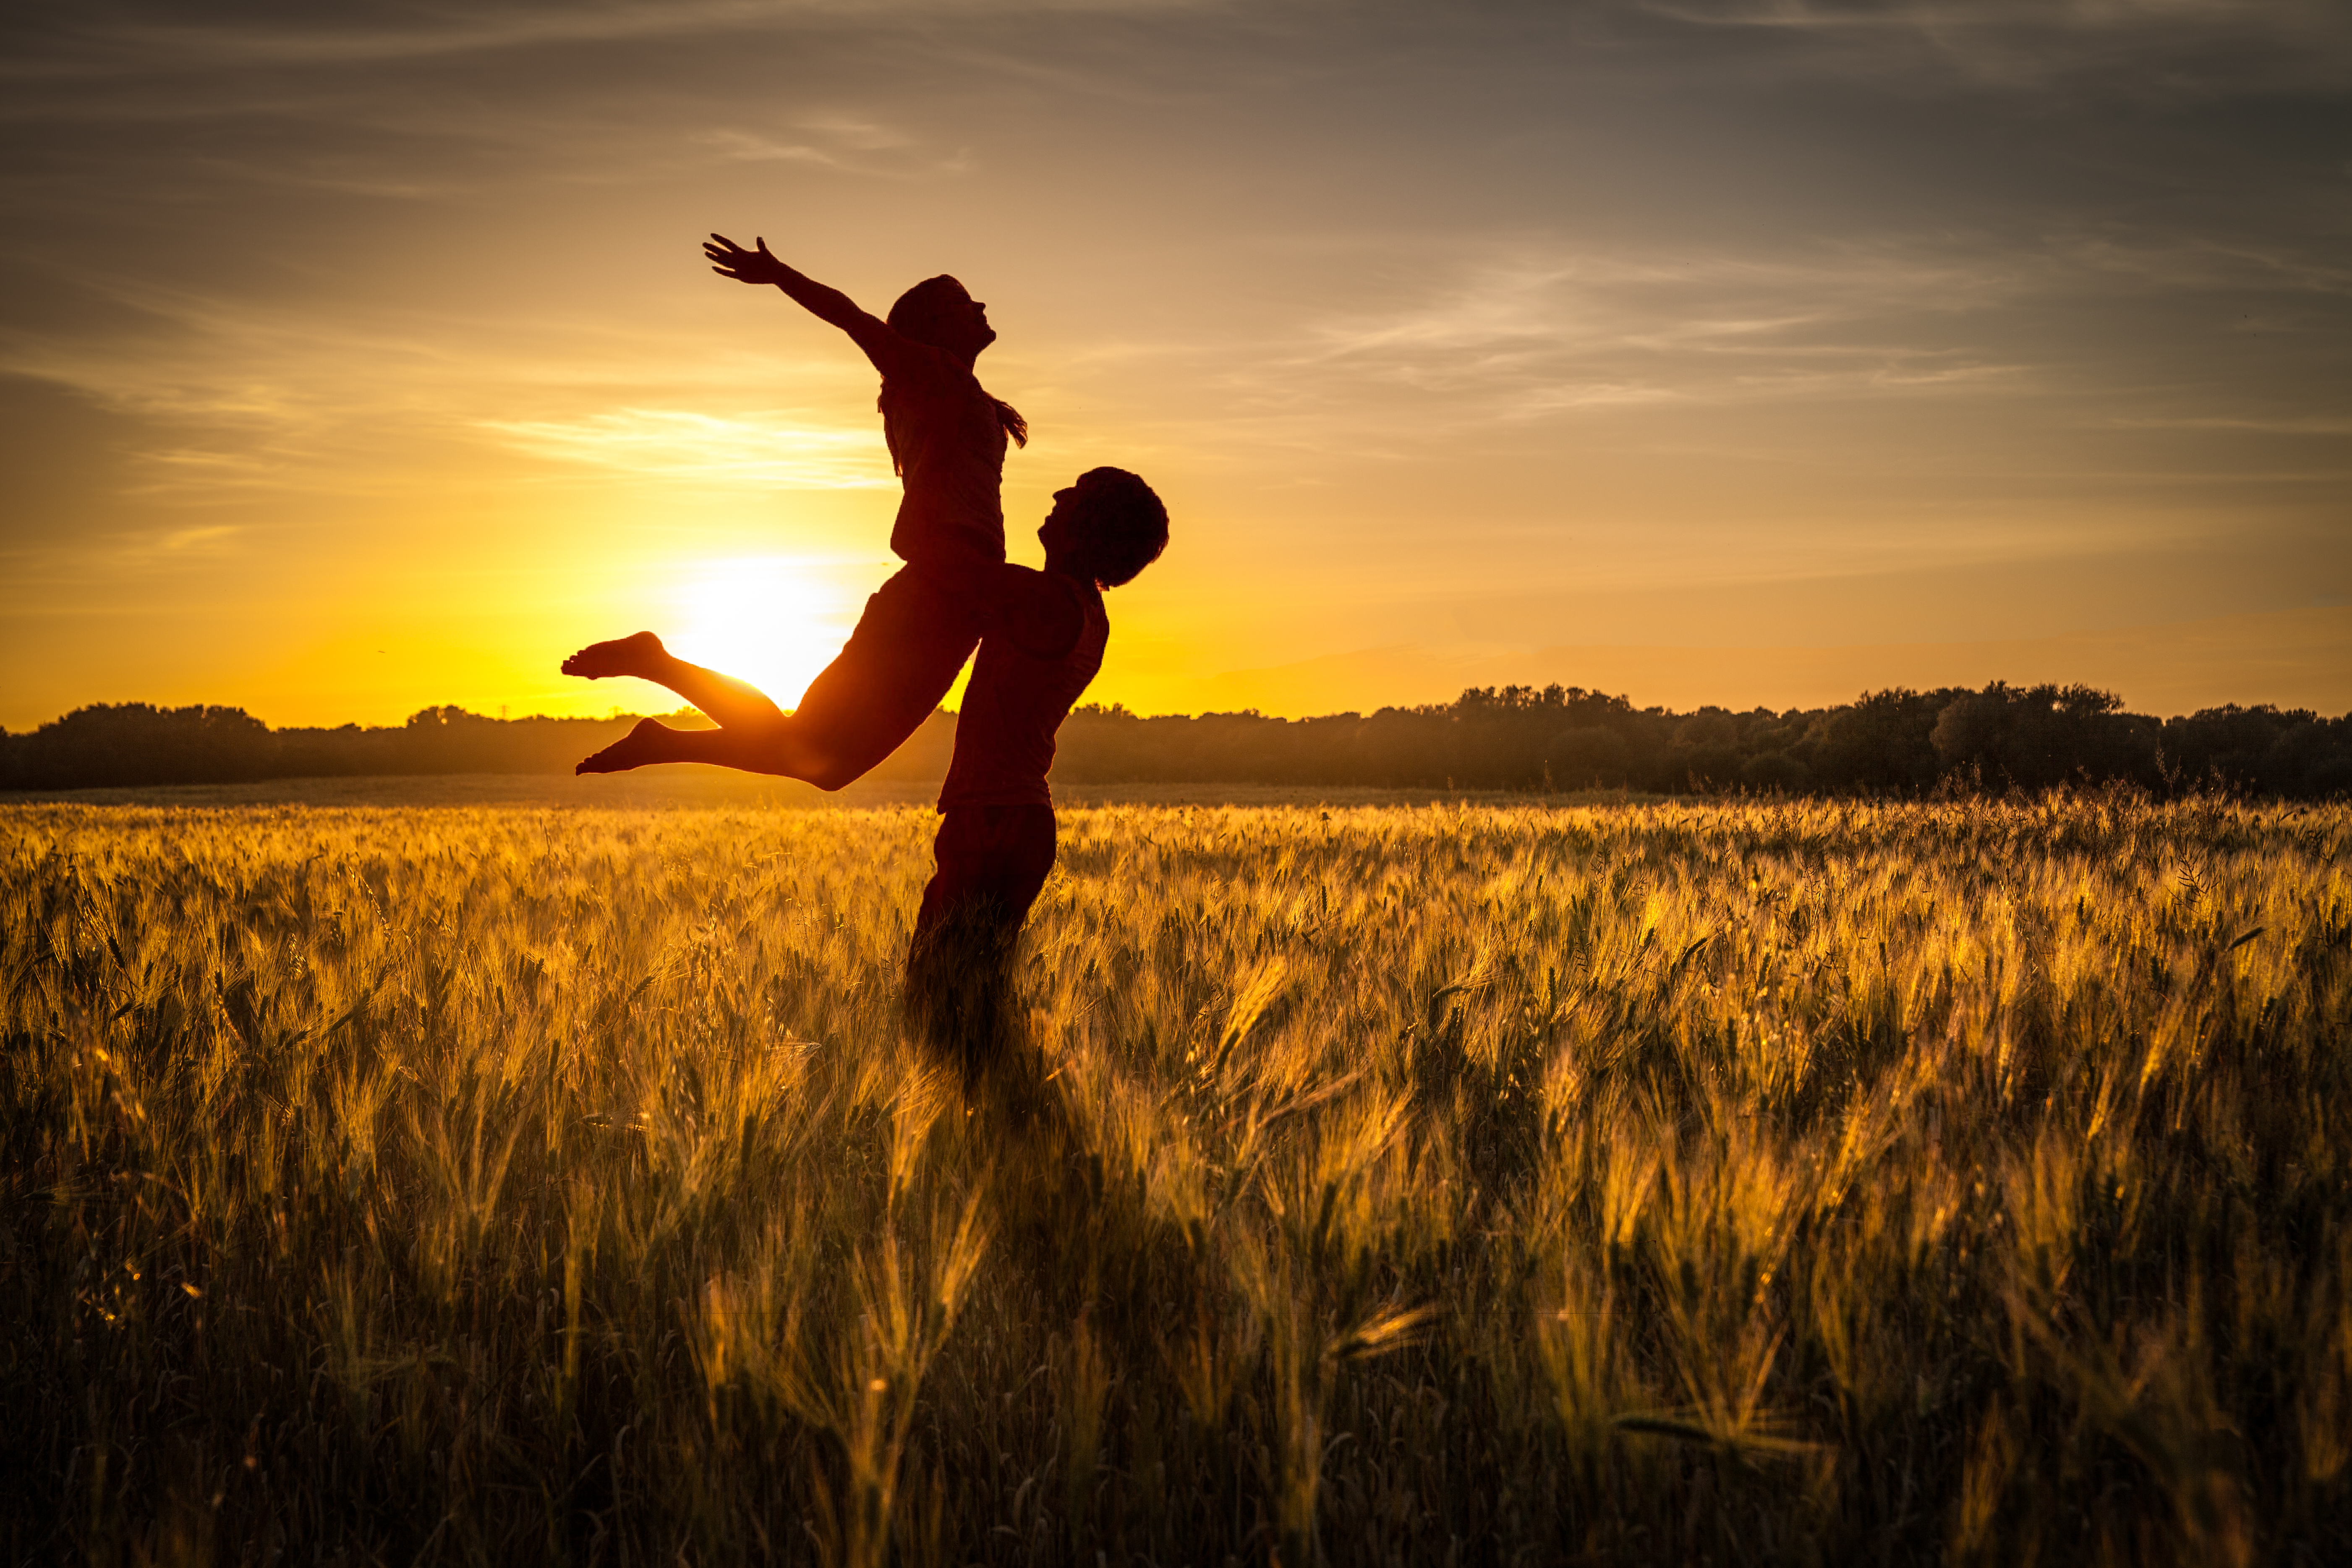 75166 download wallpaper couple, love, sunset, grass, pair, silhouettes, field screensavers and pictures for free